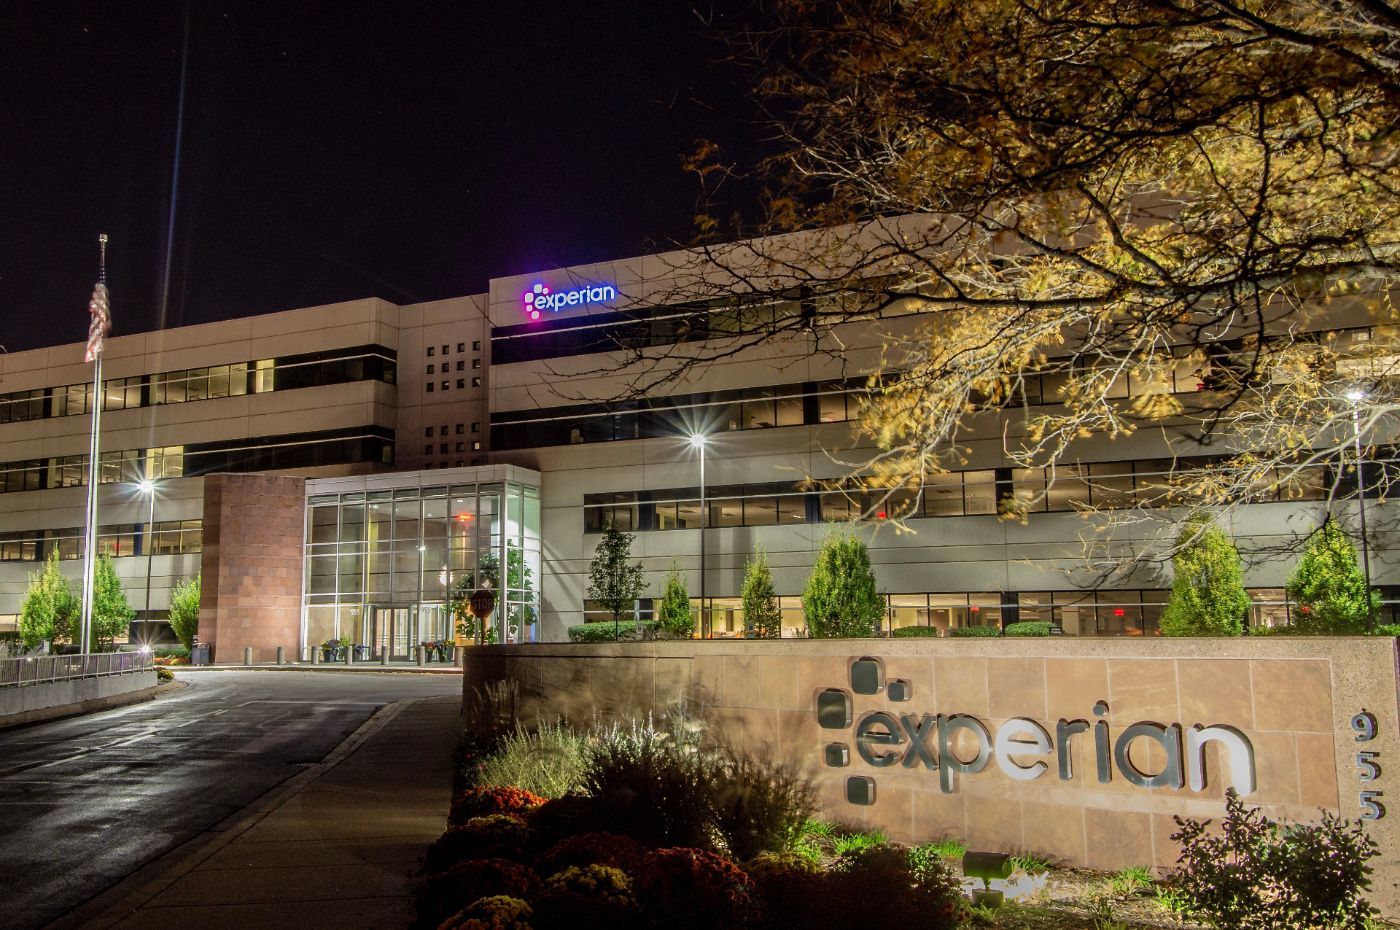 Exterior nighttime shot of Experian office building in Schaumburg, IL - false credit reporting